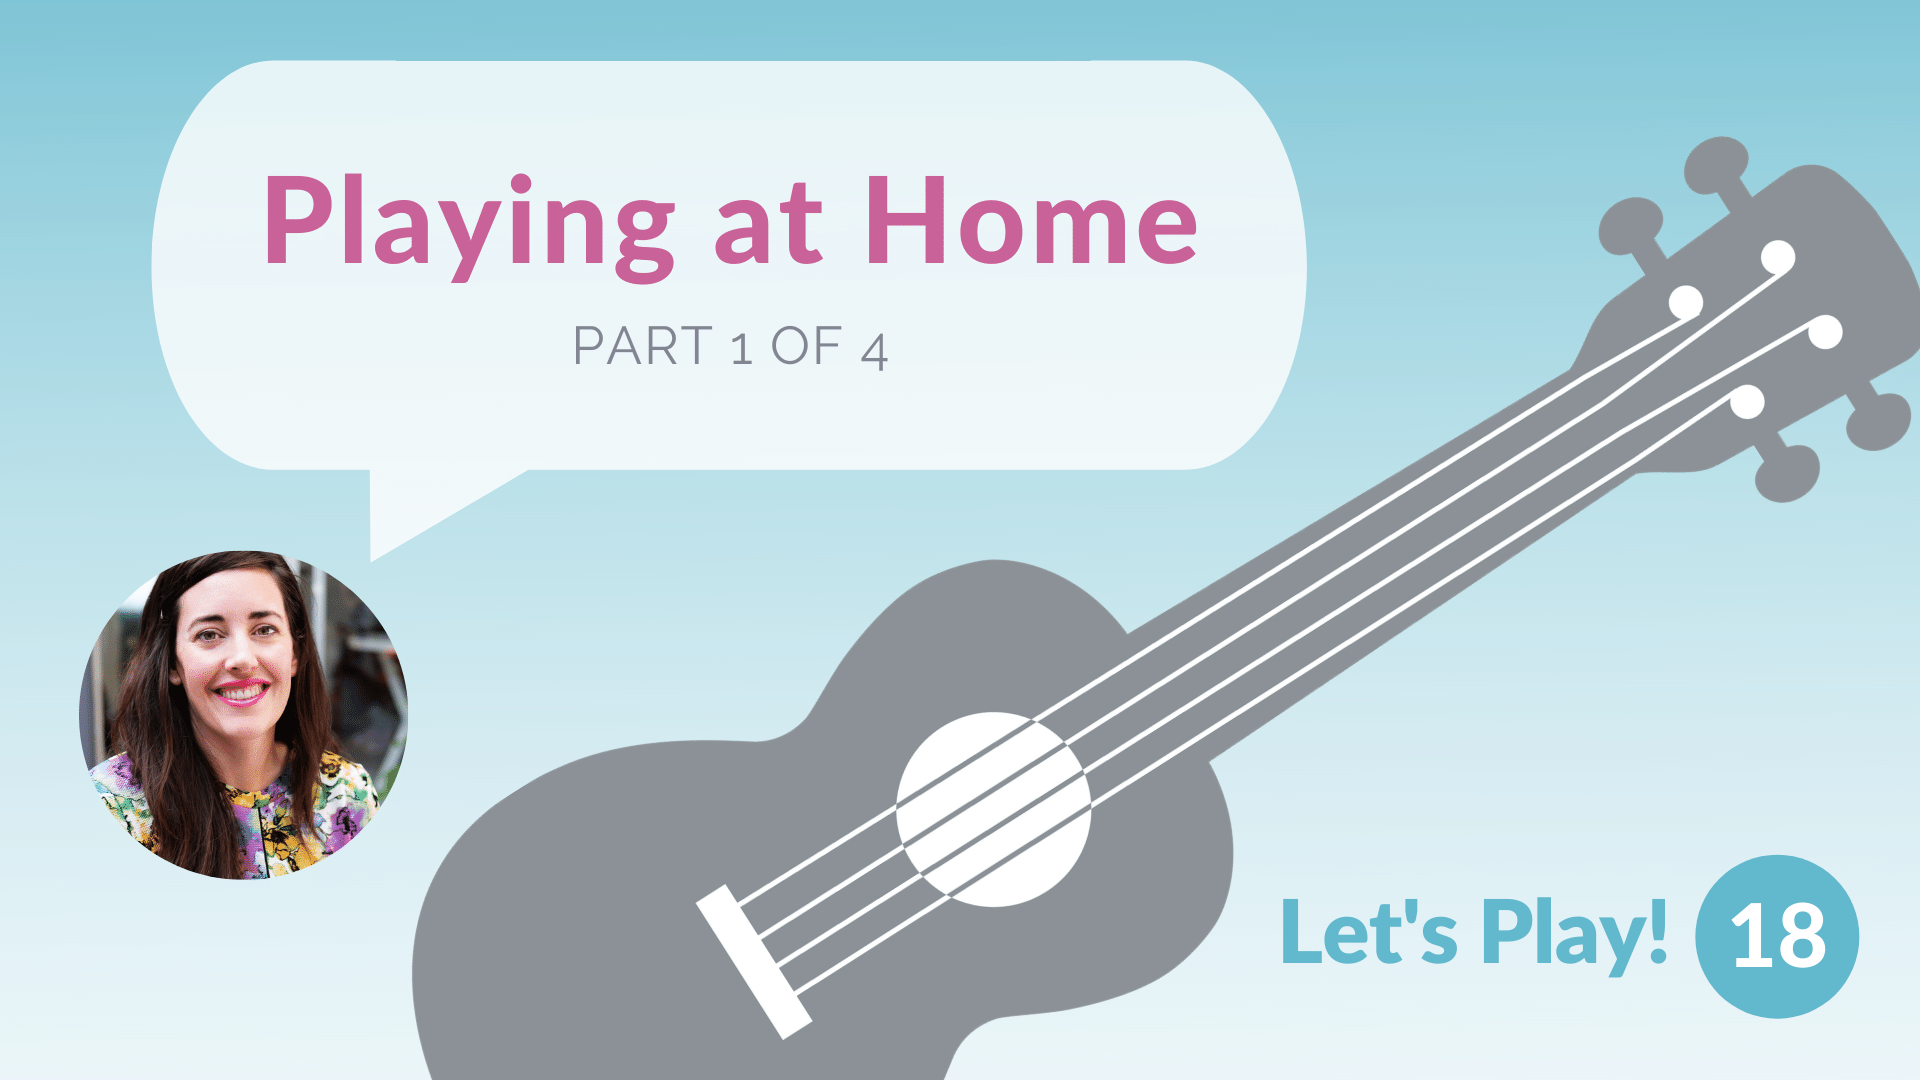 Part One: Playing at Home